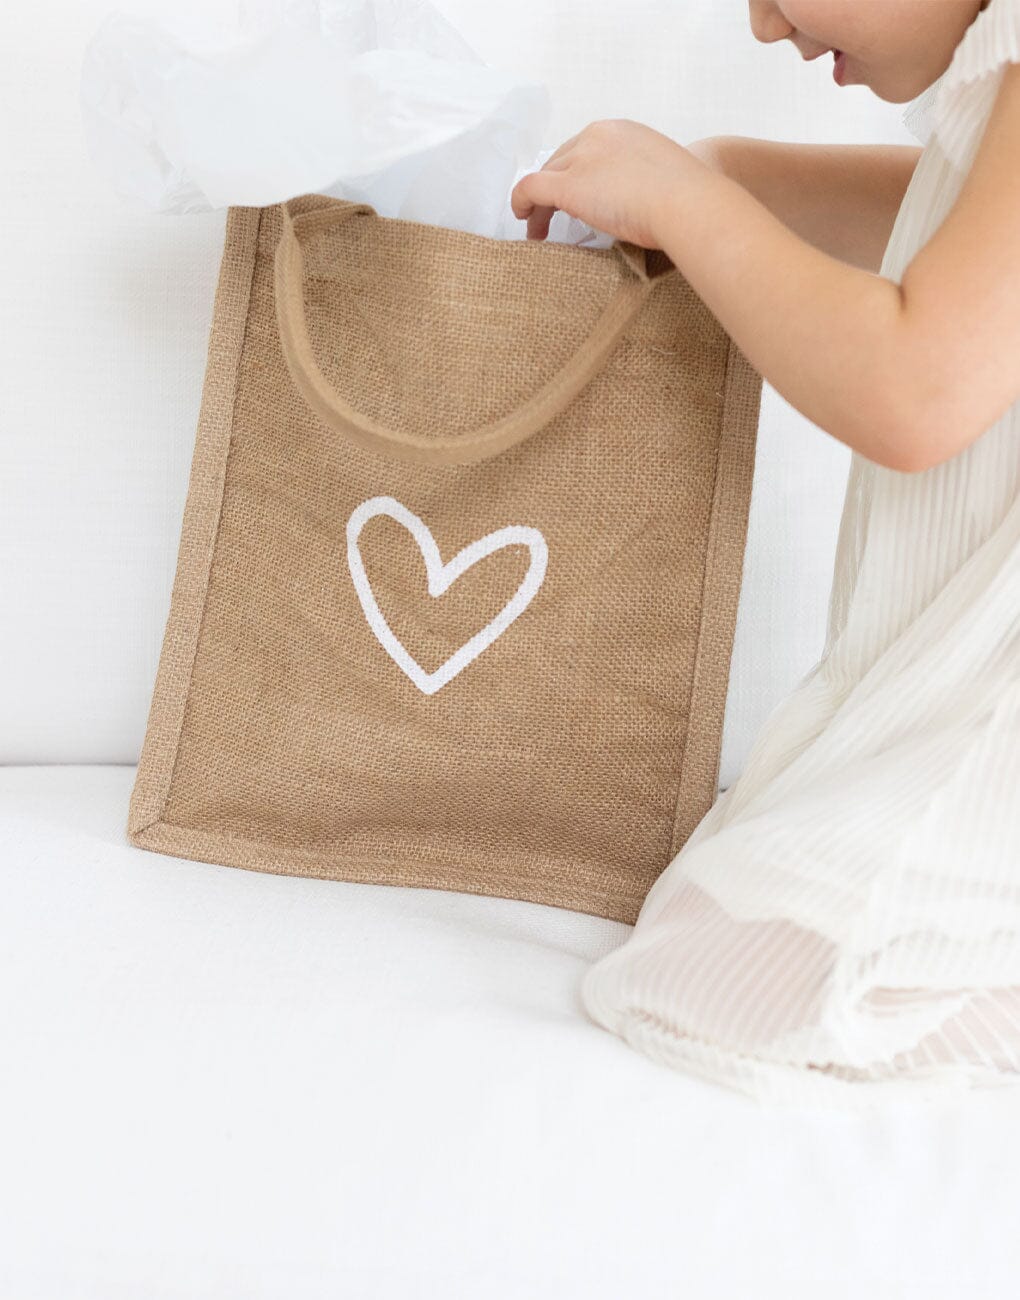 Heart Reusable Gift Tote In White Font | The Little Market